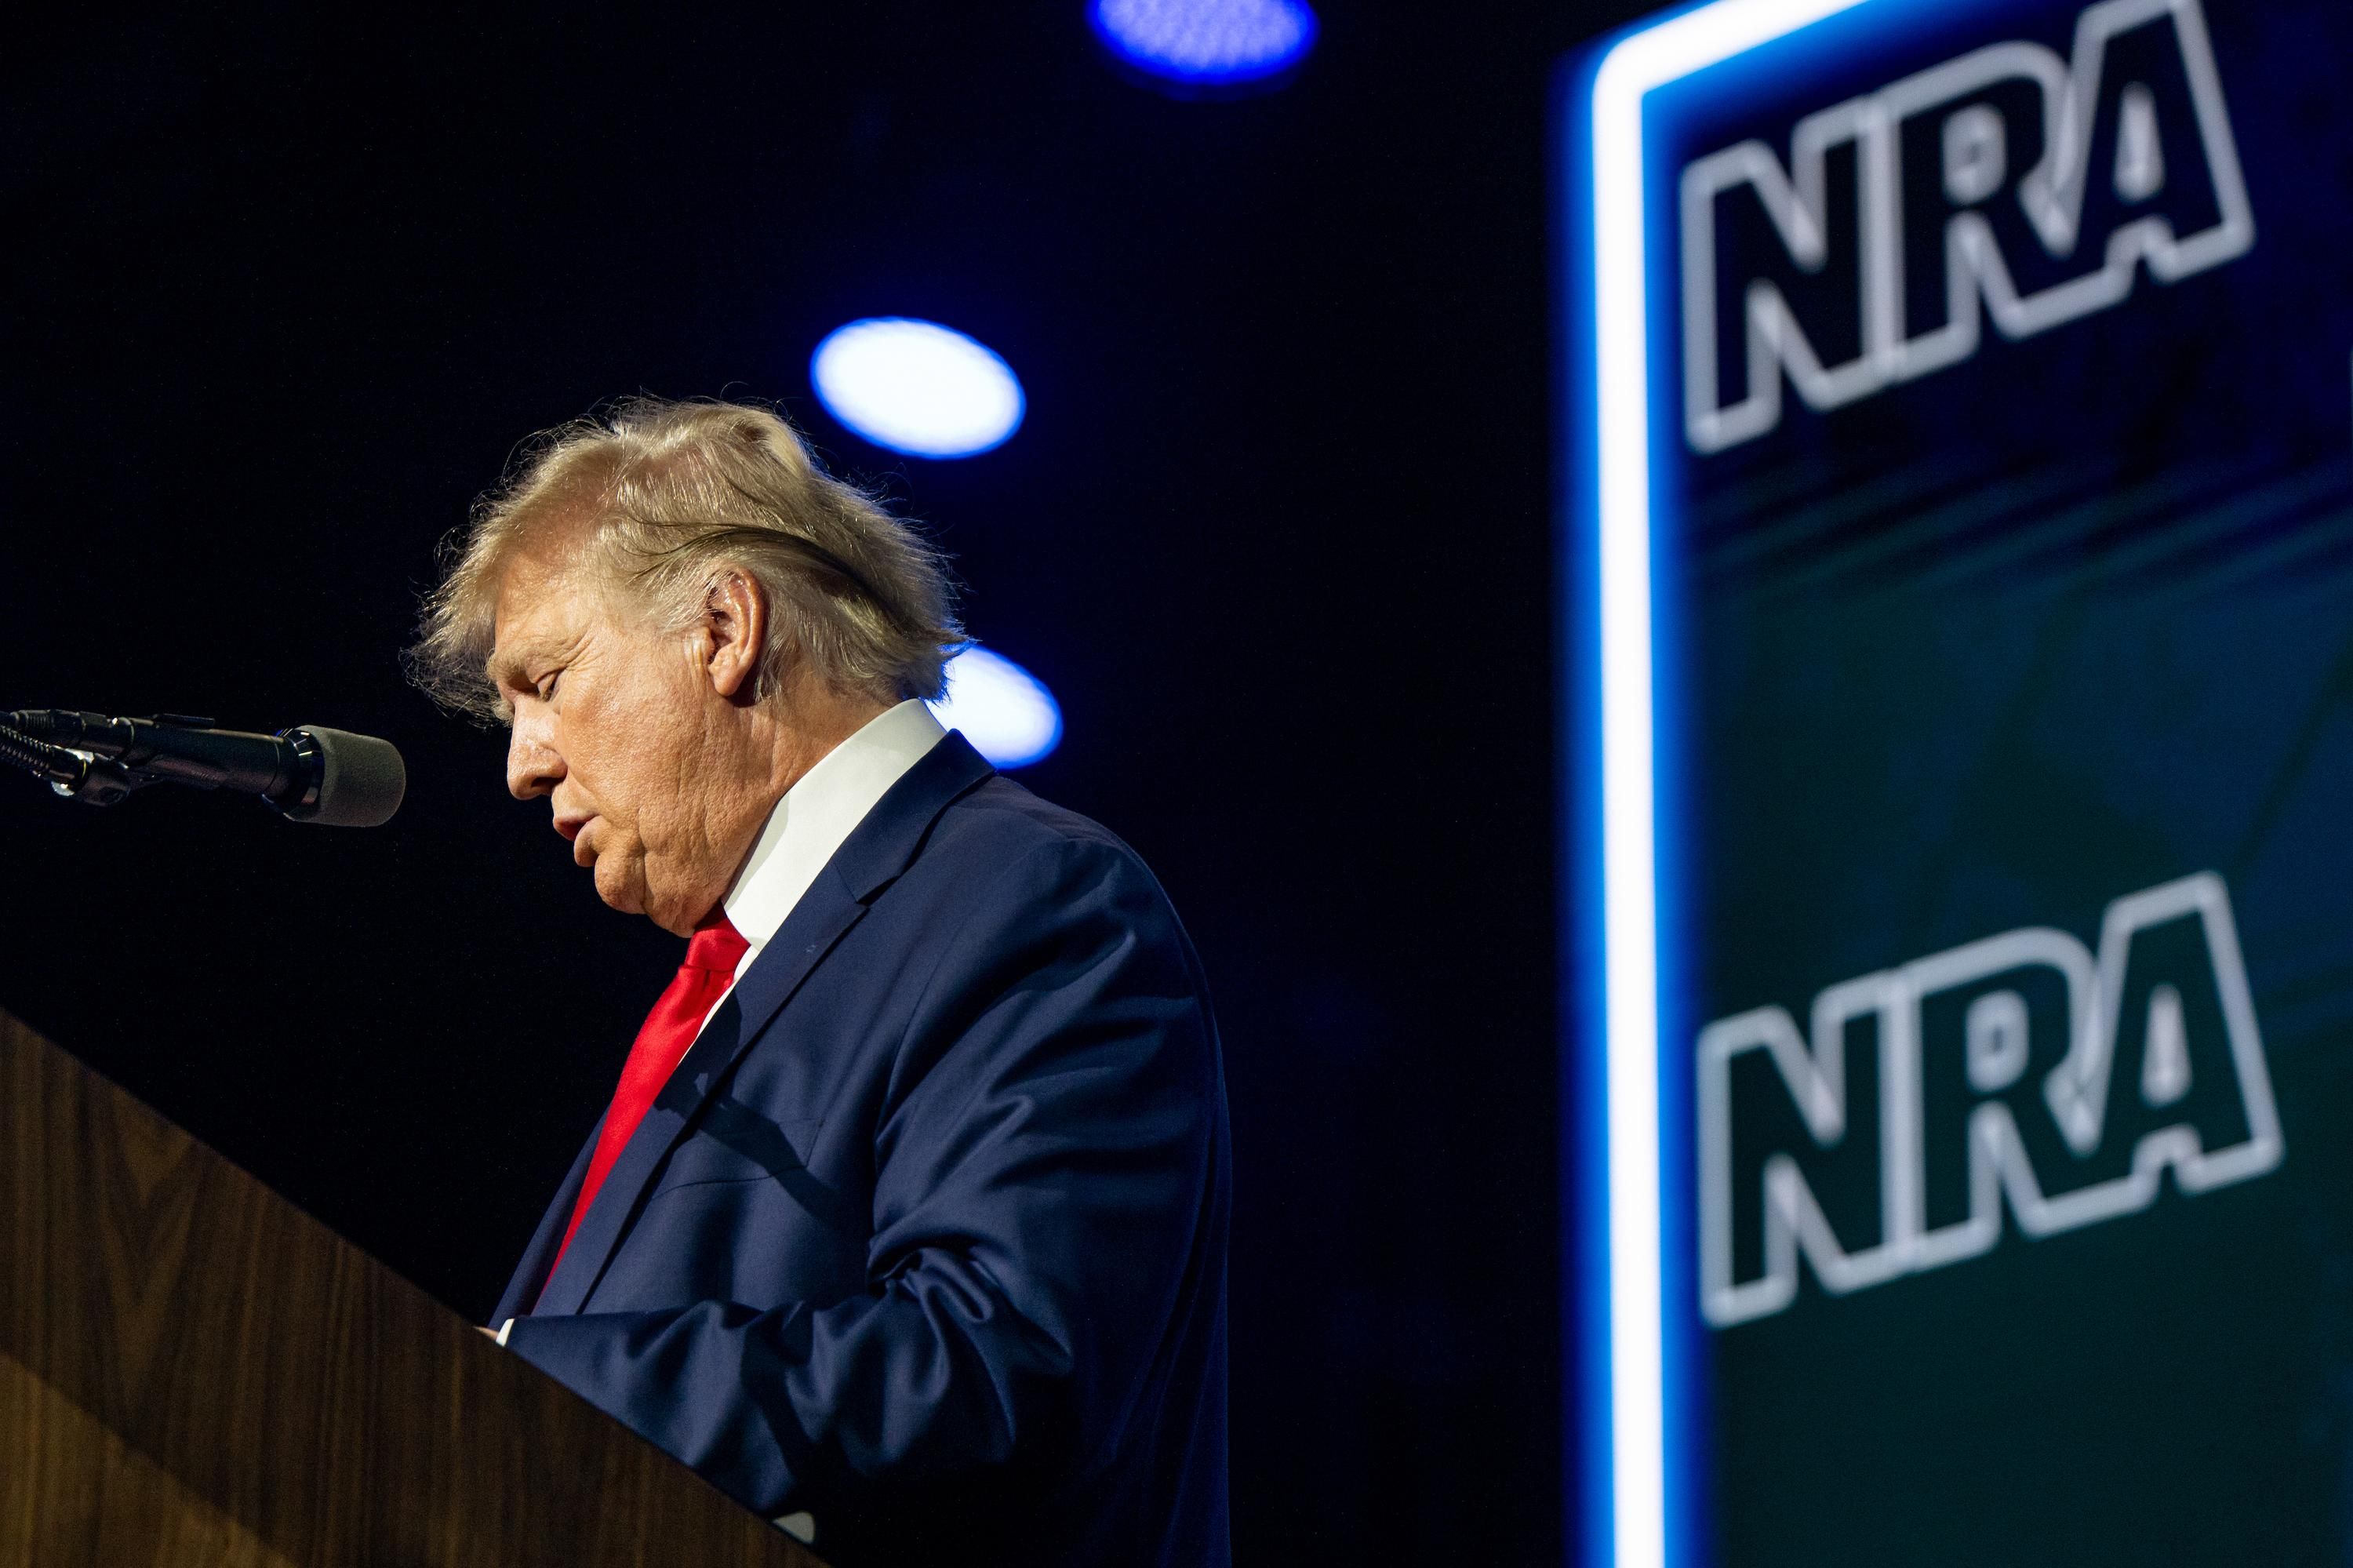 Former U.S. President Donald Trump reads the names of the victims of the Uvalde, Texas mass shooting during the National Rifle Association (NRA) annual convention on May 27, 2022 in Houston. (Photo: Brandon Bell/Getty Images)